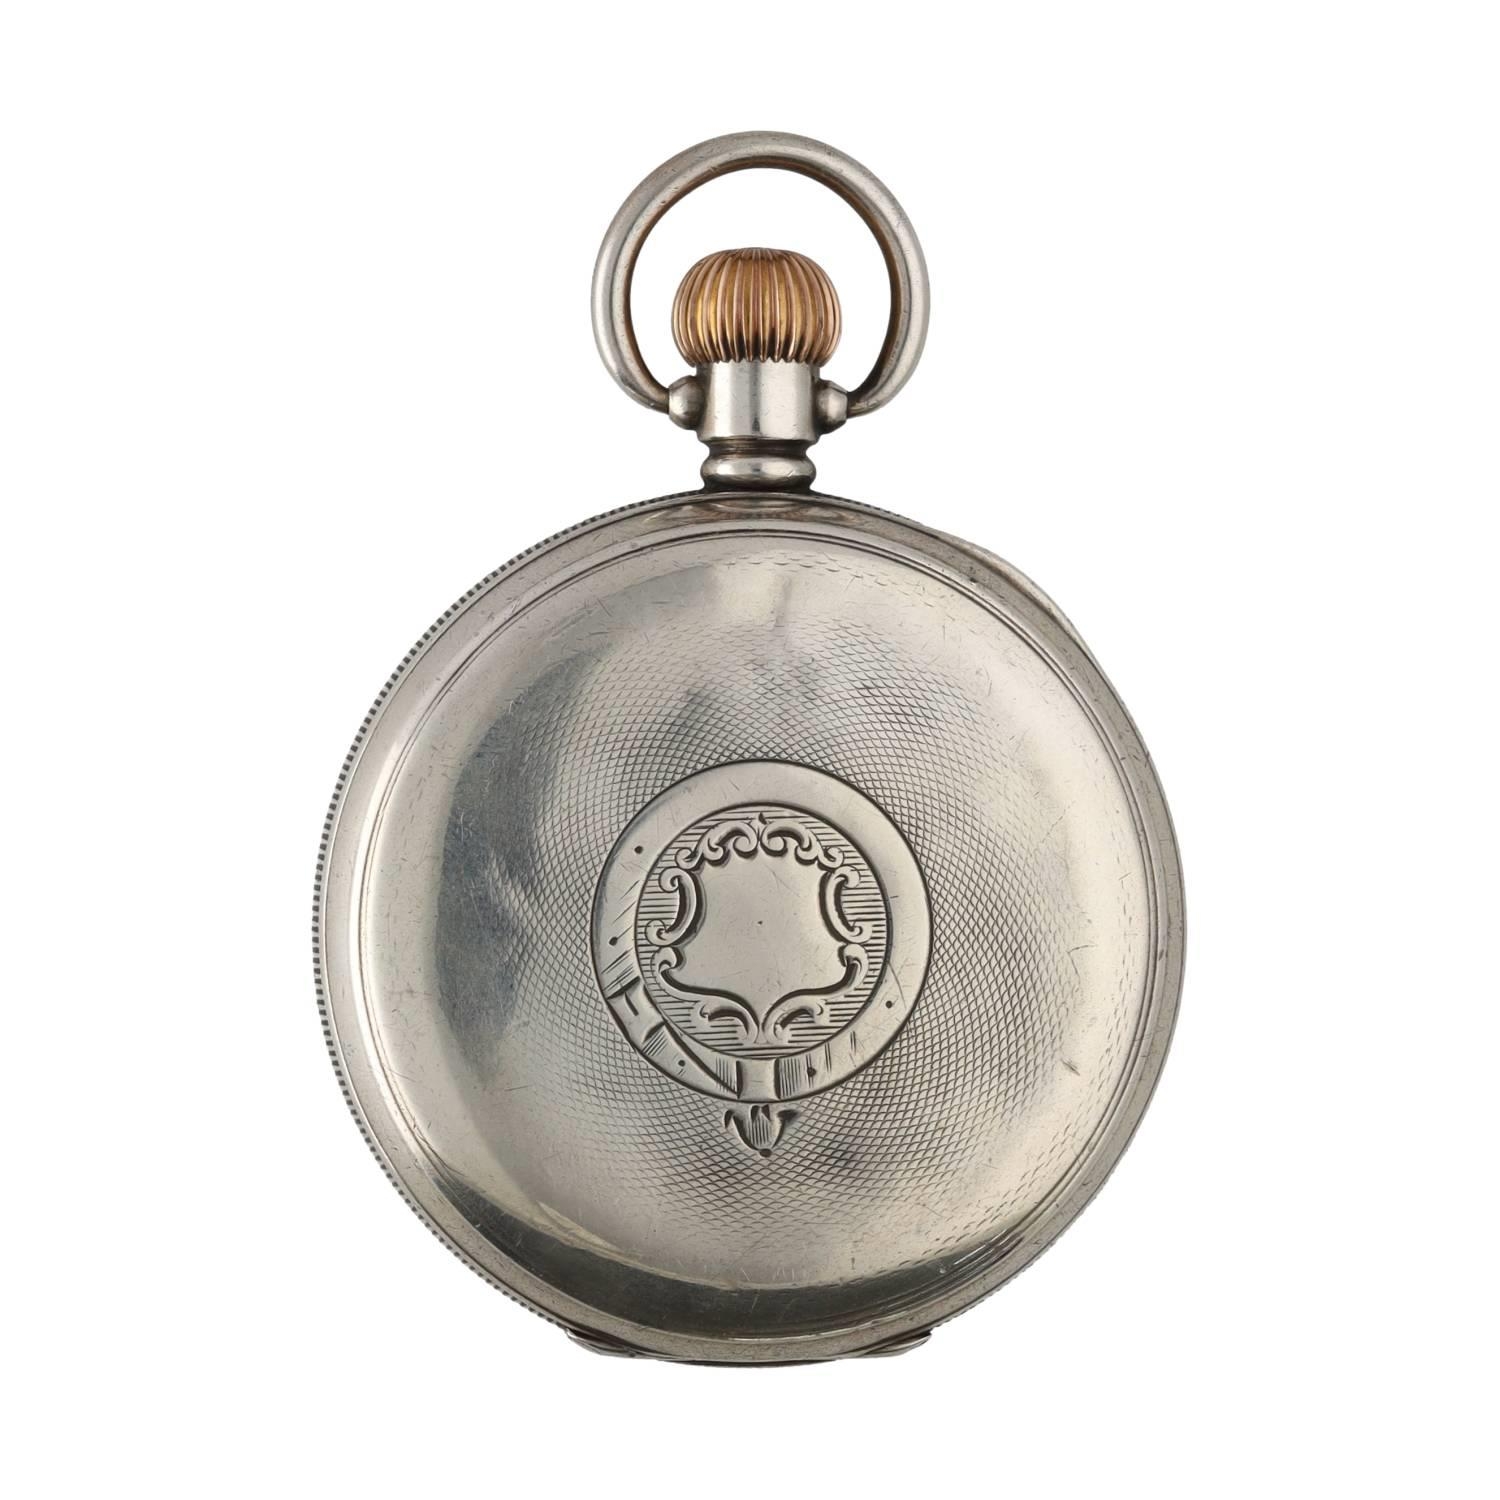 American Waltham 'Traveler' silver lever pocket watch, circa 1912, serial no. 18779288, signed - Image 3 of 3